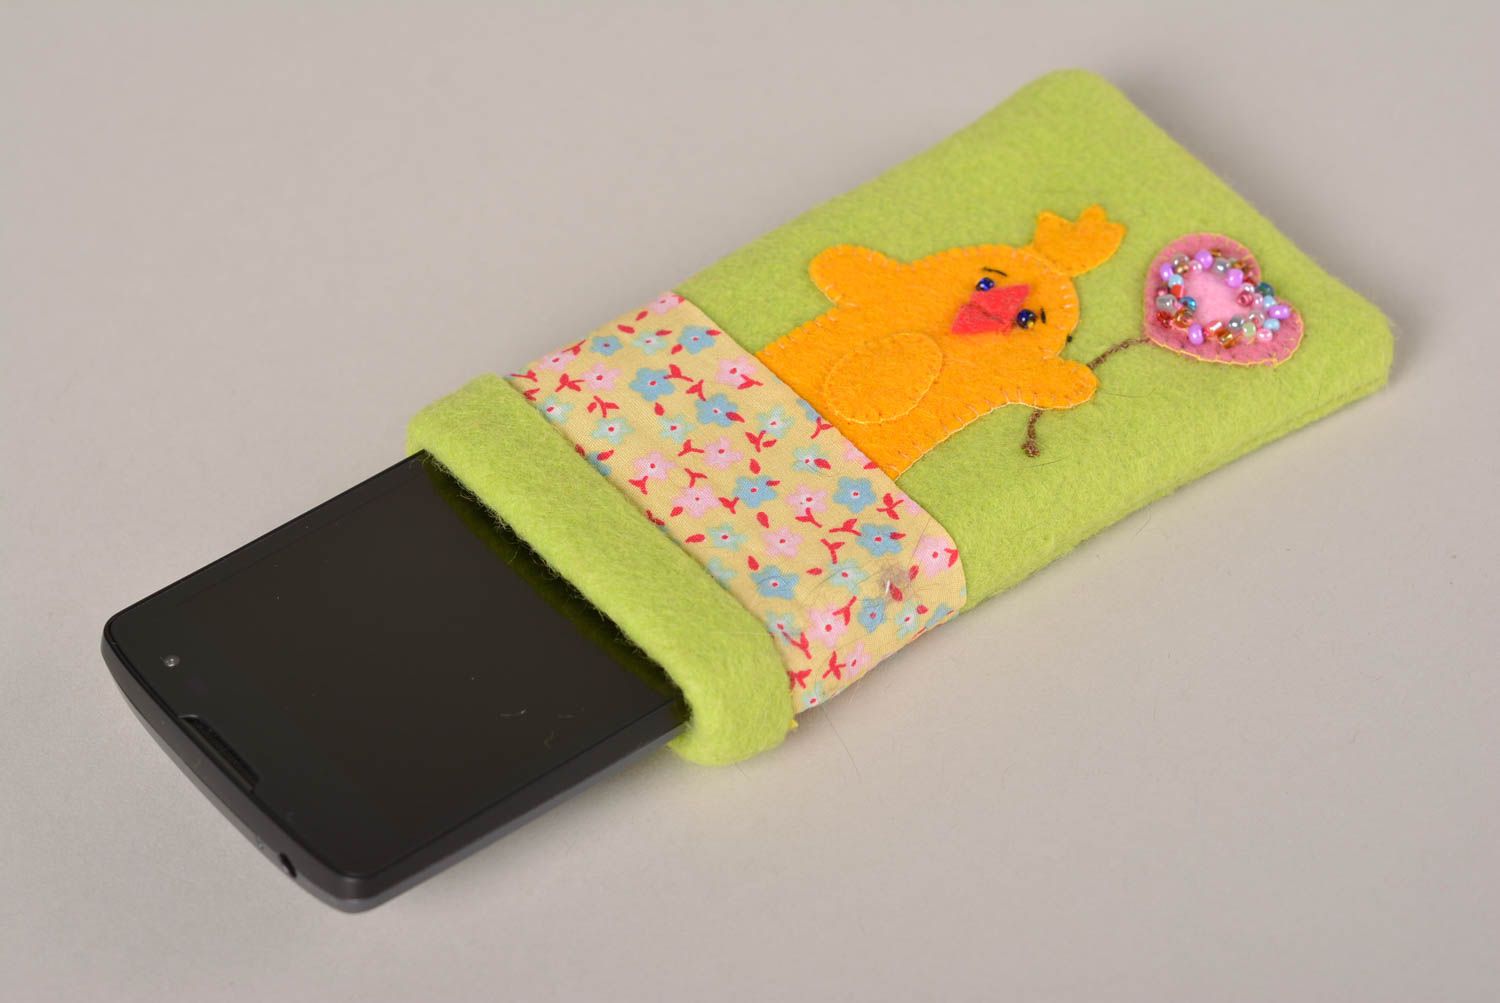 Unusual handmade felt phone case design fashion accessories for her small gifts photo 3